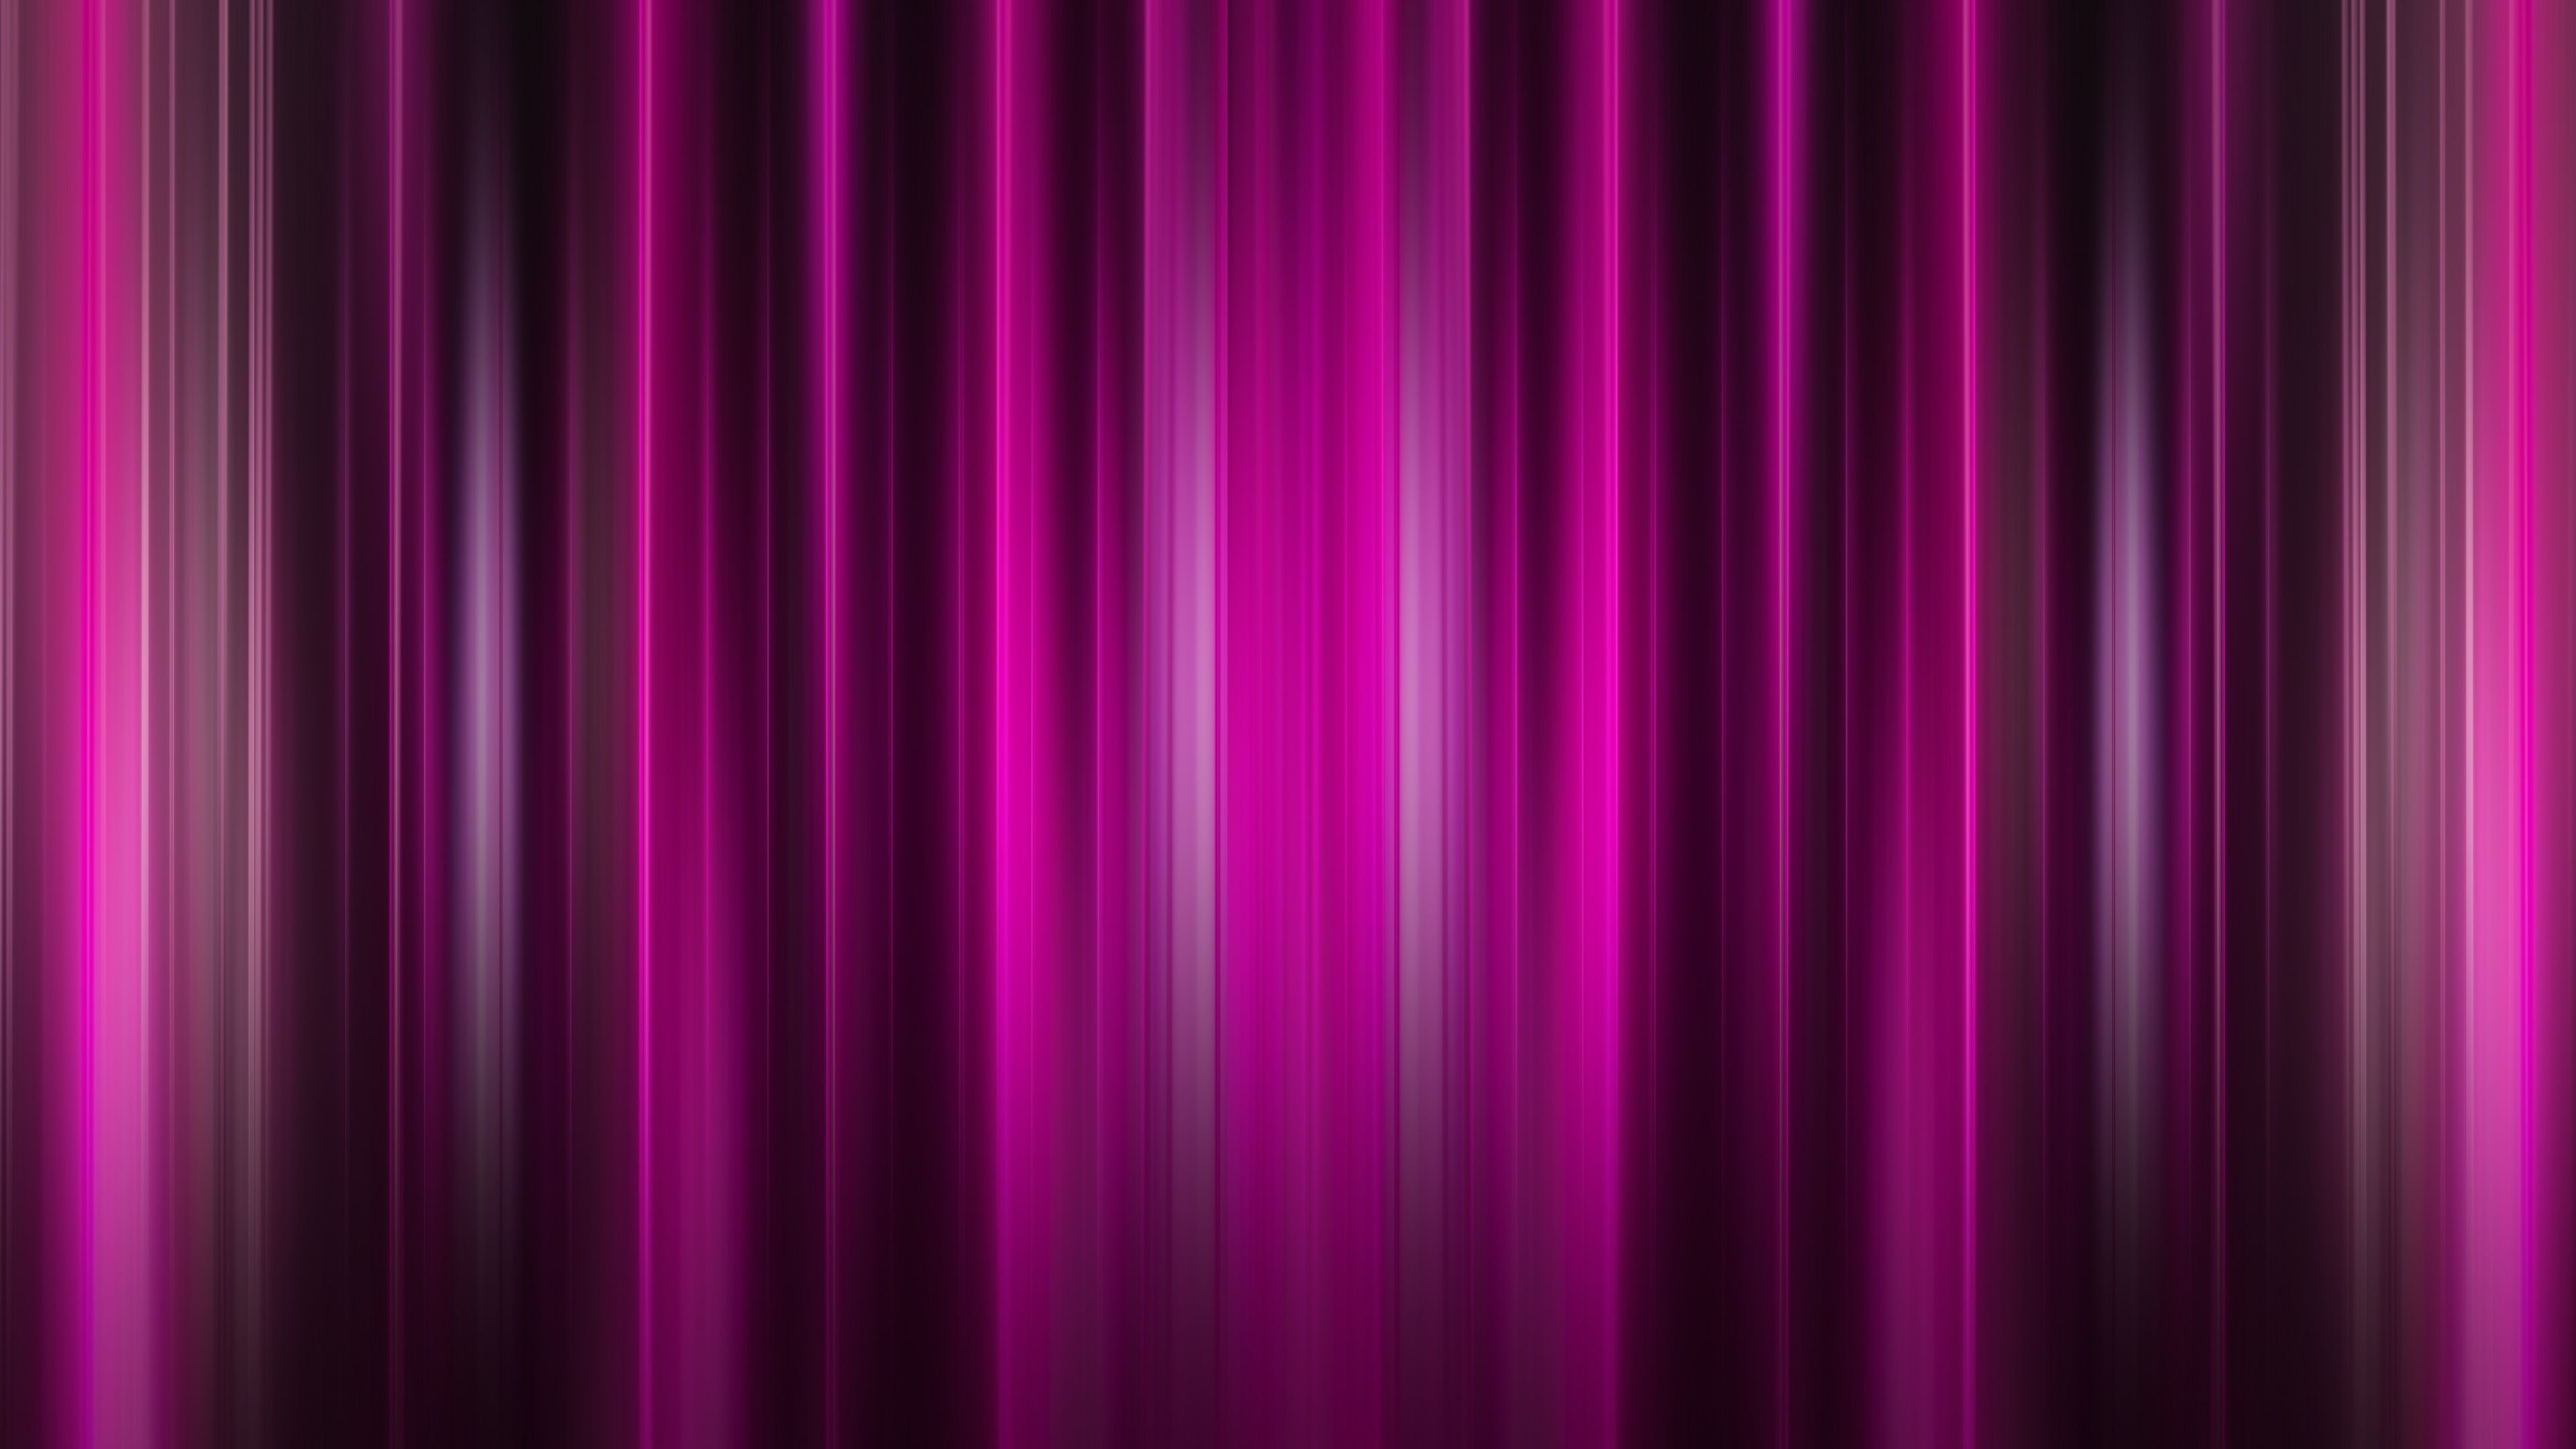 Abstract Pink Lines Background 4k Stripes Wallpaper, Pink Wallpaper, Lines Wallpaper, Hd Wallpape. Pink Wallpaper, Pink Wallpaper Background, Flower Image Hd